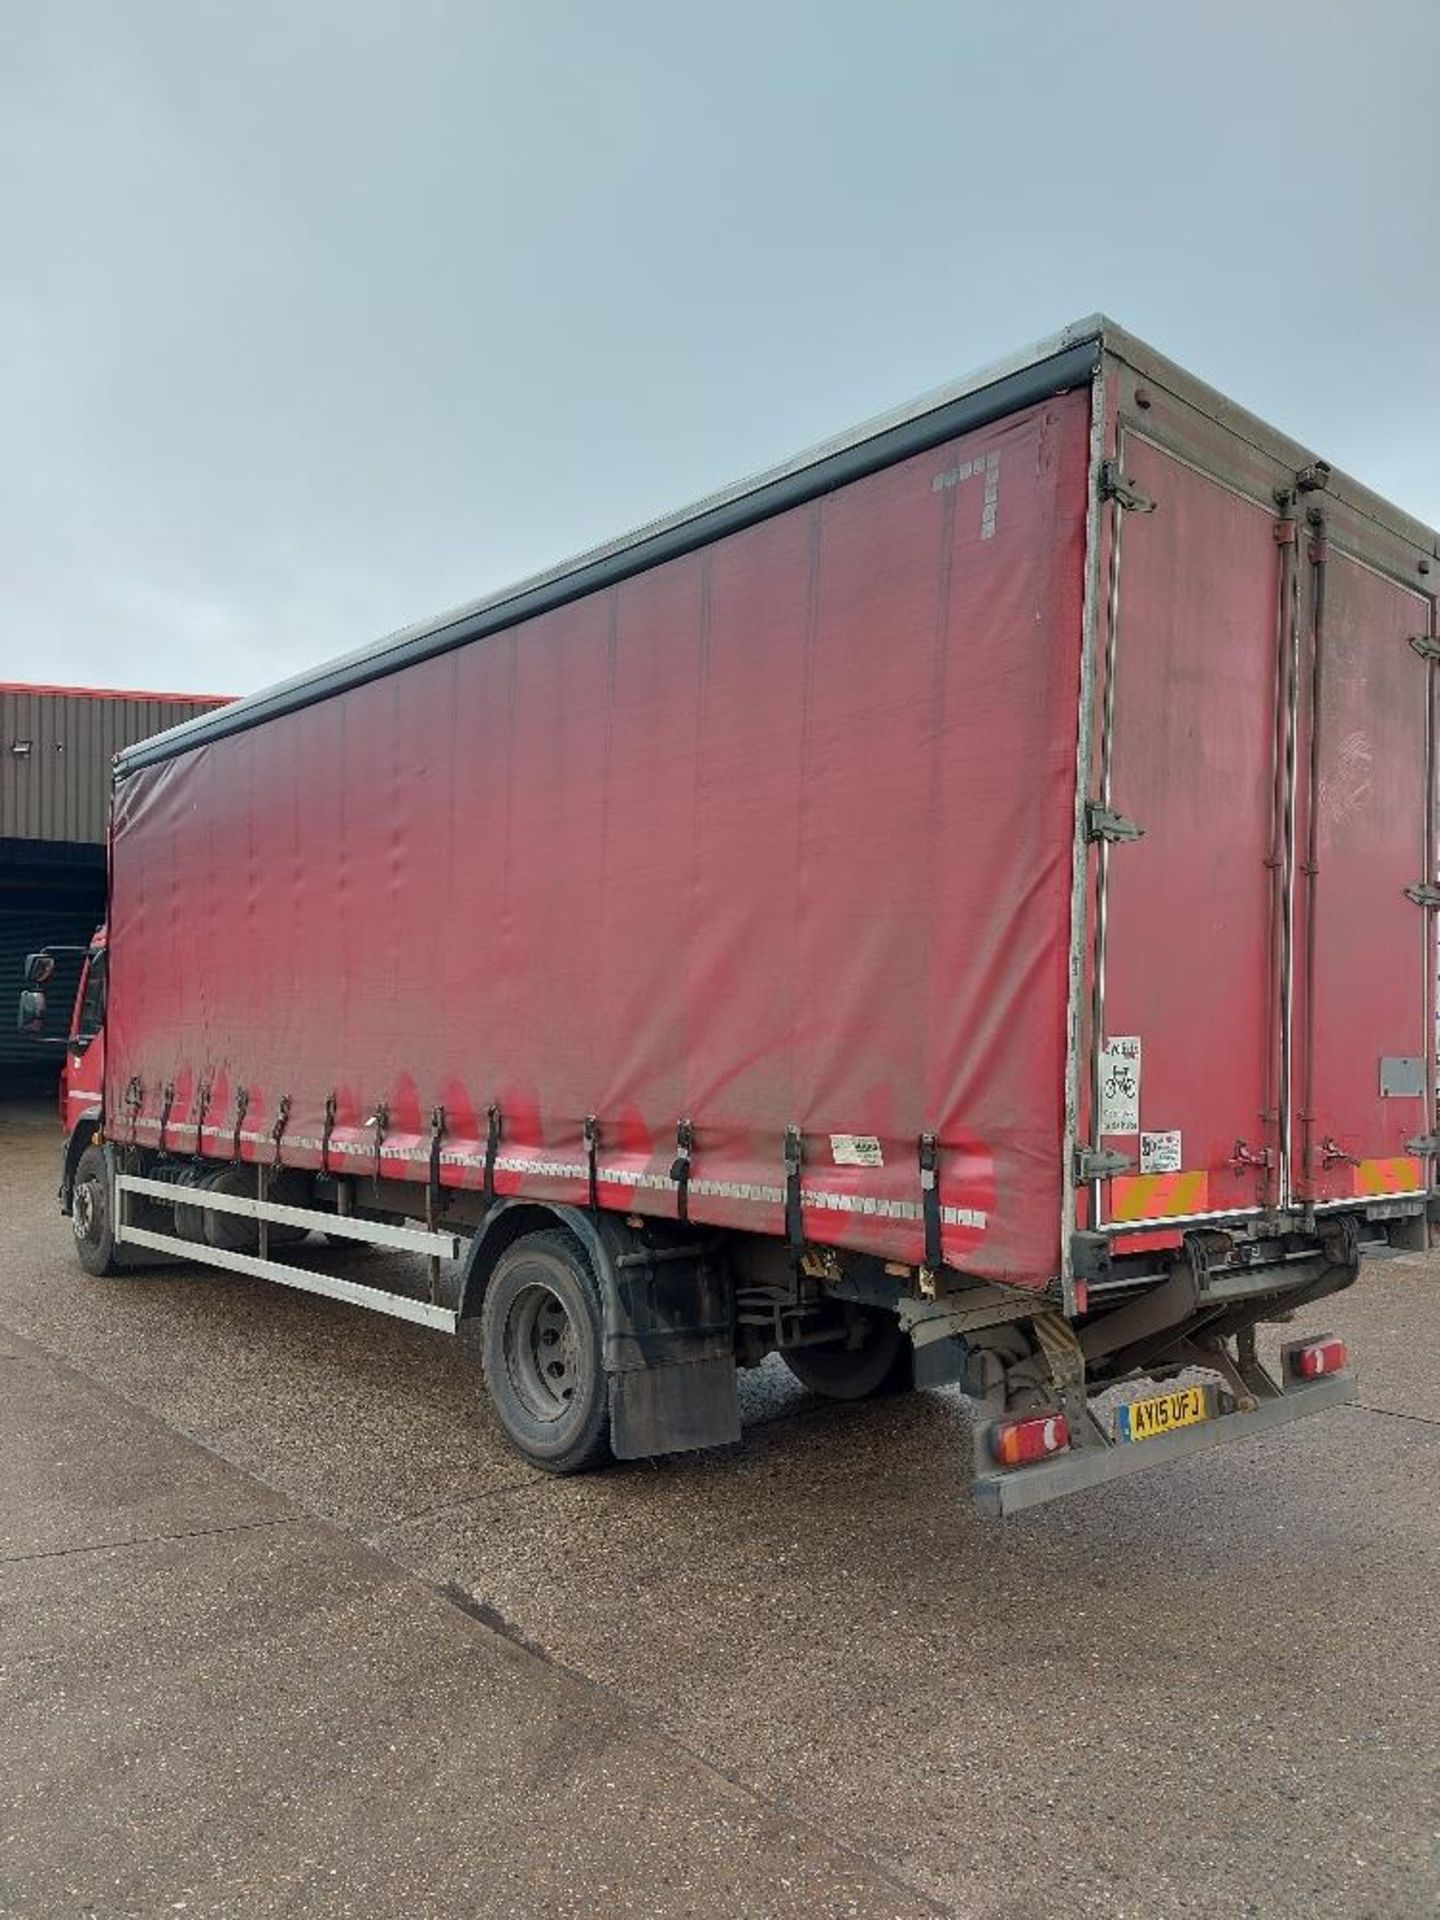 DAF LF 250 4x2 Rigid 18T Curtain Side Lorry with Tail Lift - Image 4 of 11